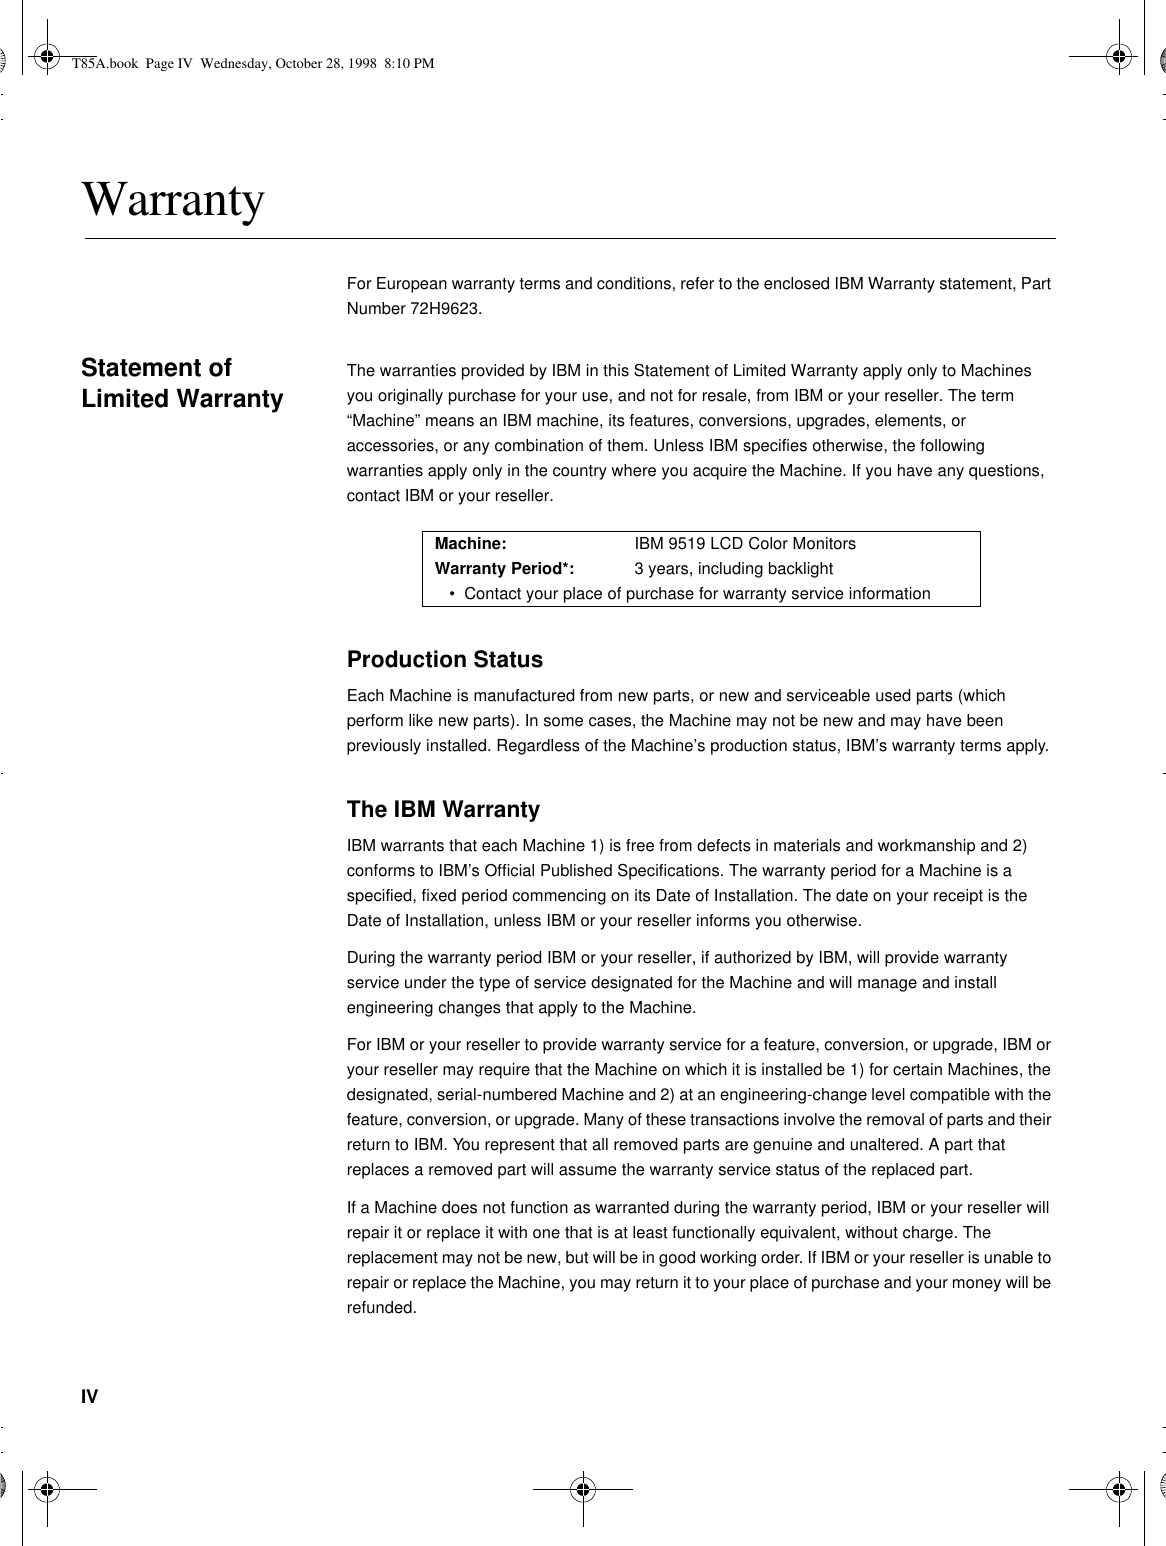 IVWarrantyFor European warranty terms and conditions, refer to the enclosed IBM Warranty statement, Part Number 72H9623.Statement of Limited WarrantyThe warranties provided by IBM in this Statement of Limited Warranty apply only to Machines you originally purchase for your use, and not for resale, from IBM or your reseller. The term “Machine” means an IBM machine, its features, conversions, upgrades, elements, or accessories, or any combination of them. Unless IBM specifies otherwise, the following warranties apply only in the country where you acquire the Machine. If you have any questions, contact IBM or your reseller.Production StatusEach Machine is manufactured from new parts, or new and serviceable used parts (which perform like new parts). In some cases, the Machine may not be new and may have been previously installed. Regardless of the Machine’s production status, IBM’s warranty terms apply.The IBM WarrantyIBM warrants that each Machine 1) is free from defects in materials and workmanship and 2) conforms to IBM’s Official Published Specifications. The warranty period for a Machine is a specified, fixed period commencing on its Date of Installation. The date on your receipt is the Date of Installation, unless IBM or your reseller informs you otherwise.During the warranty period IBM or your reseller, if authorized by IBM, will provide warranty service under the type of service designated for the Machine and will manage and install engineering changes that apply to the Machine.For IBM or your reseller to provide warranty service for a feature, conversion, or upgrade, IBM or your reseller may require that the Machine on which it is installed be 1) for certain Machines, the designated, serial-numbered Machine and 2) at an engineering-change level compatible with the feature, conversion, or upgrade. Many of these transactions involve the removal of parts and their return to IBM. You represent that all removed parts are genuine and unaltered. A part that replaces a removed part will assume the warranty service status of the replaced part.If a Machine does not function as warranted during the warranty period, IBM or your reseller will repair it or replace it with one that is at least functionally equivalent, without charge. The replacement may not be new, but will be in good working order. If IBM or your reseller is unable to repair or replace the Machine, you may return it to your place of purchase and your money will be refunded.Machine: IBM 9519 LCD Color MonitorsWarranty Period*: 3 years, including backlight•Contact your place of purchase for warranty service informationT85A.book  Page IV  Wednesday, October 28, 1998  8:10 PM